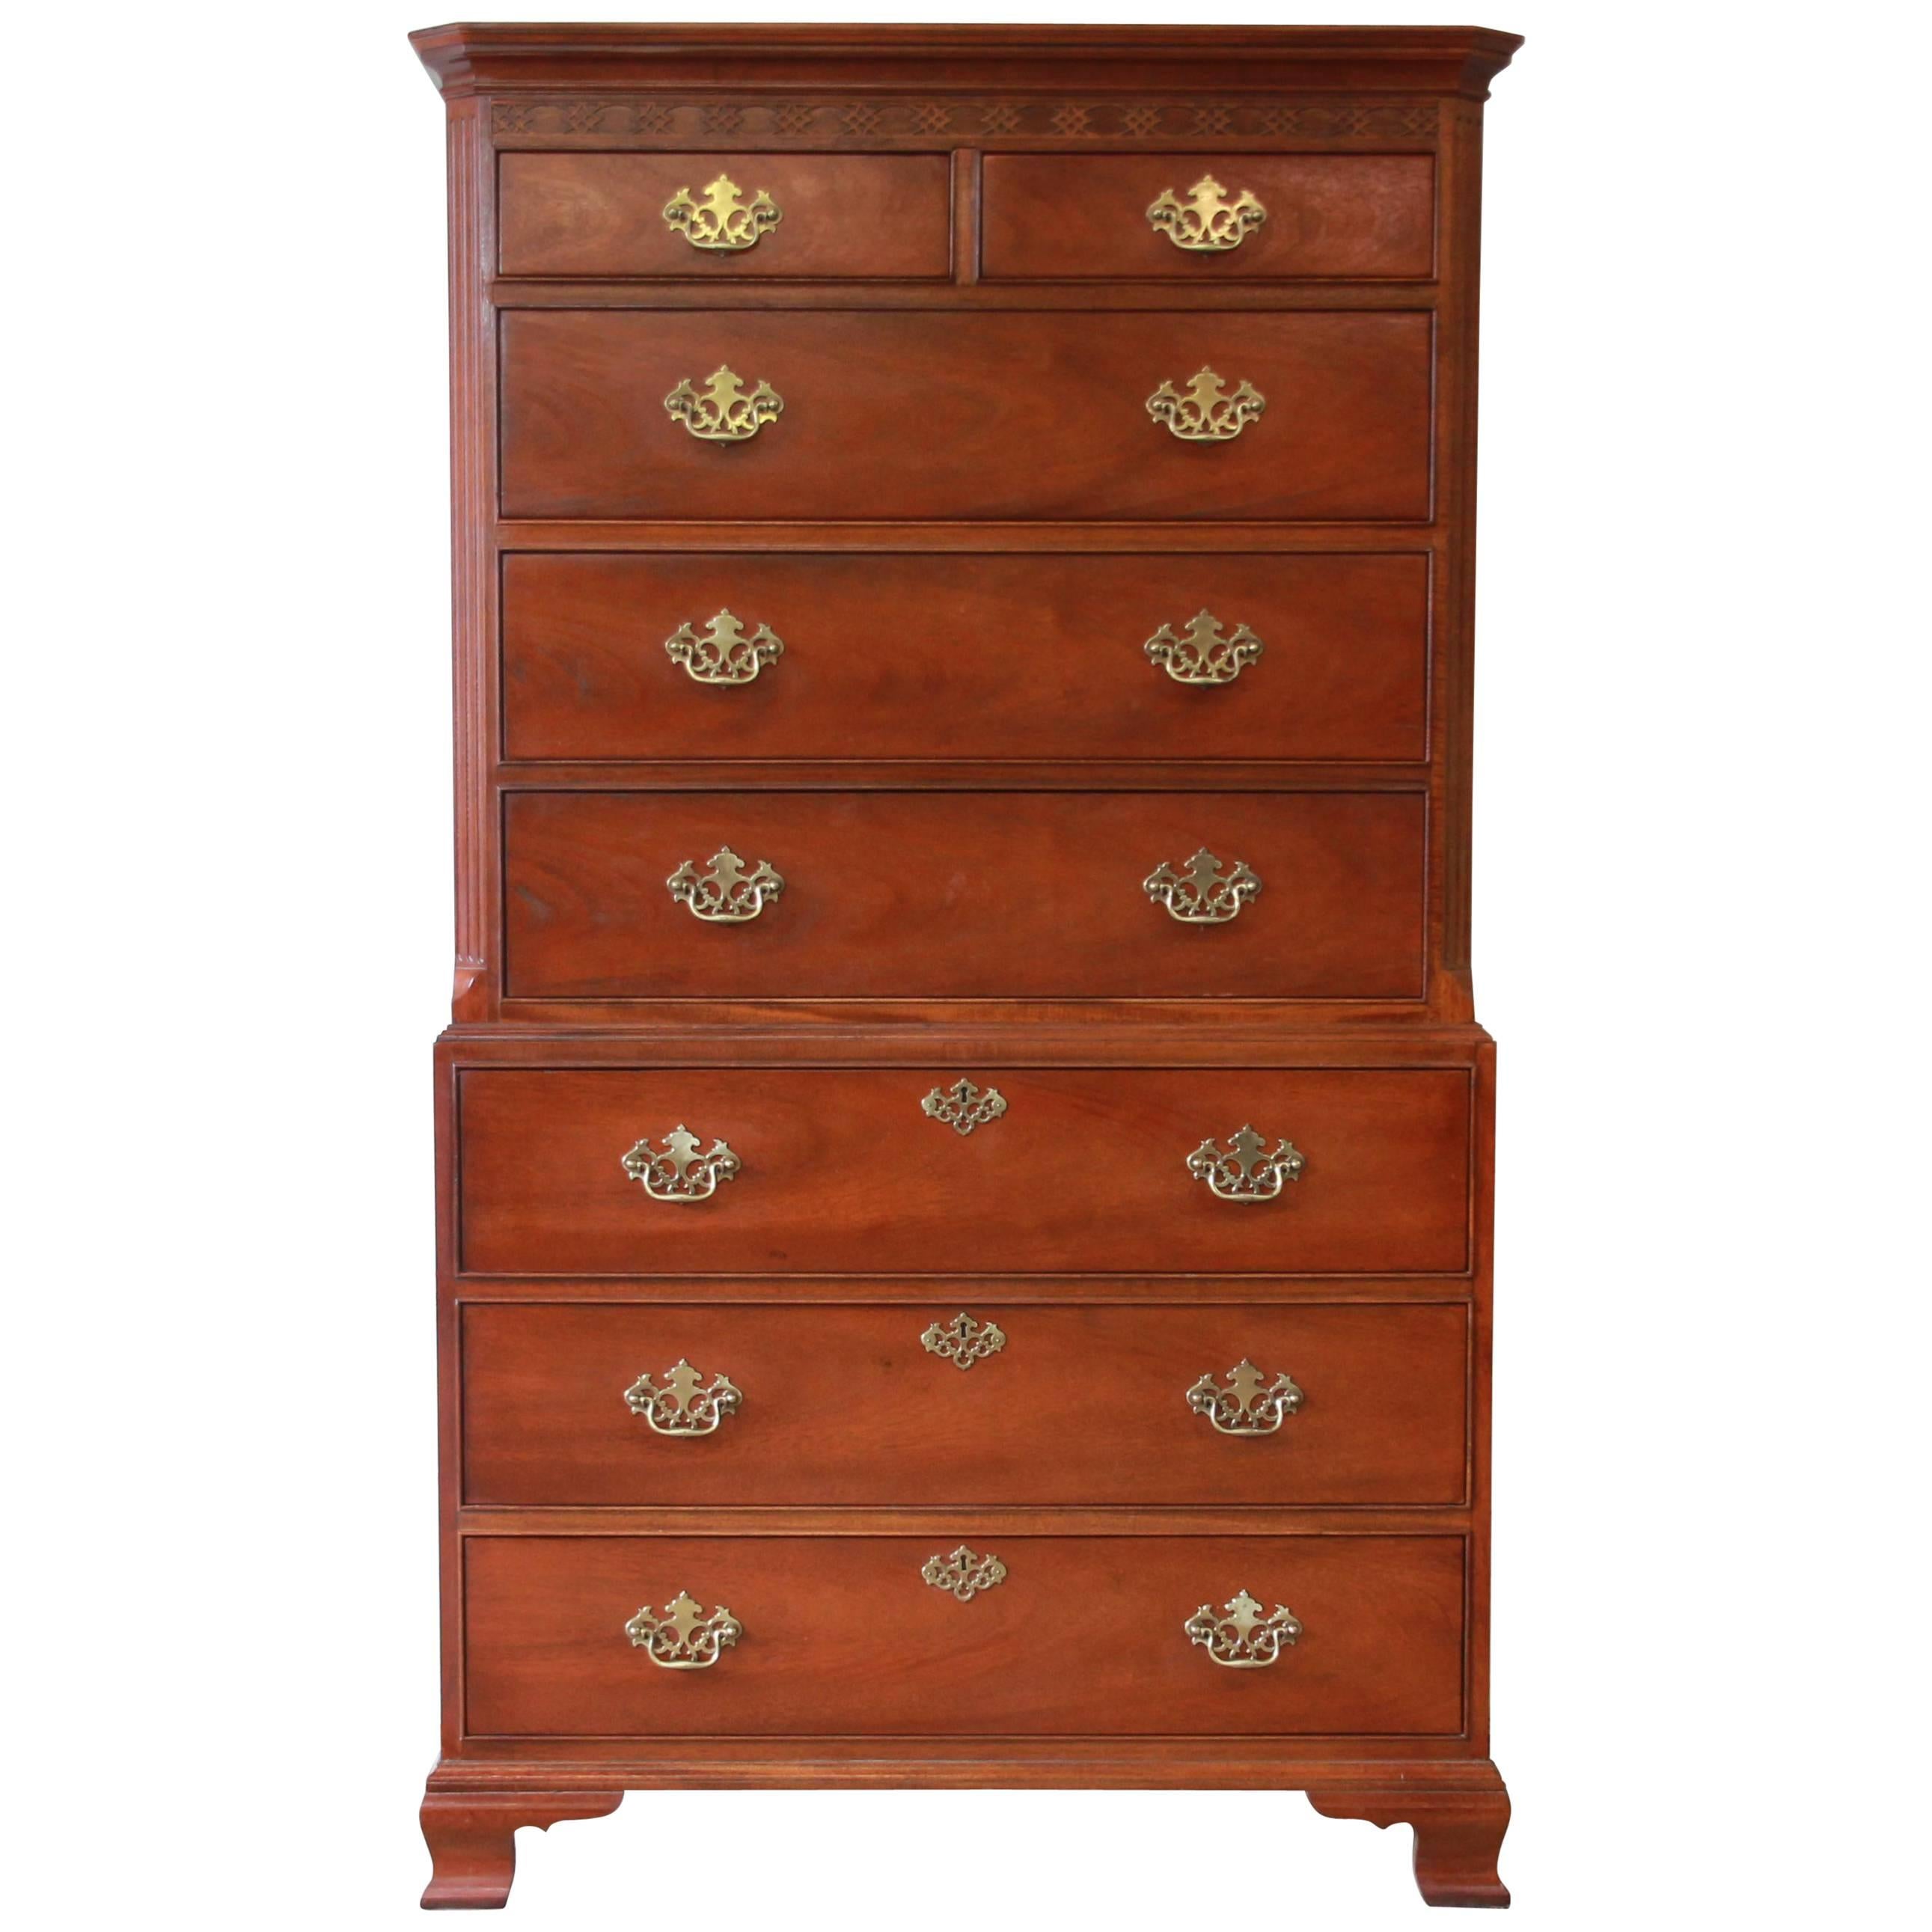 Baker Furniture Chippendale Style Mahogany Chest on Chest Dresser